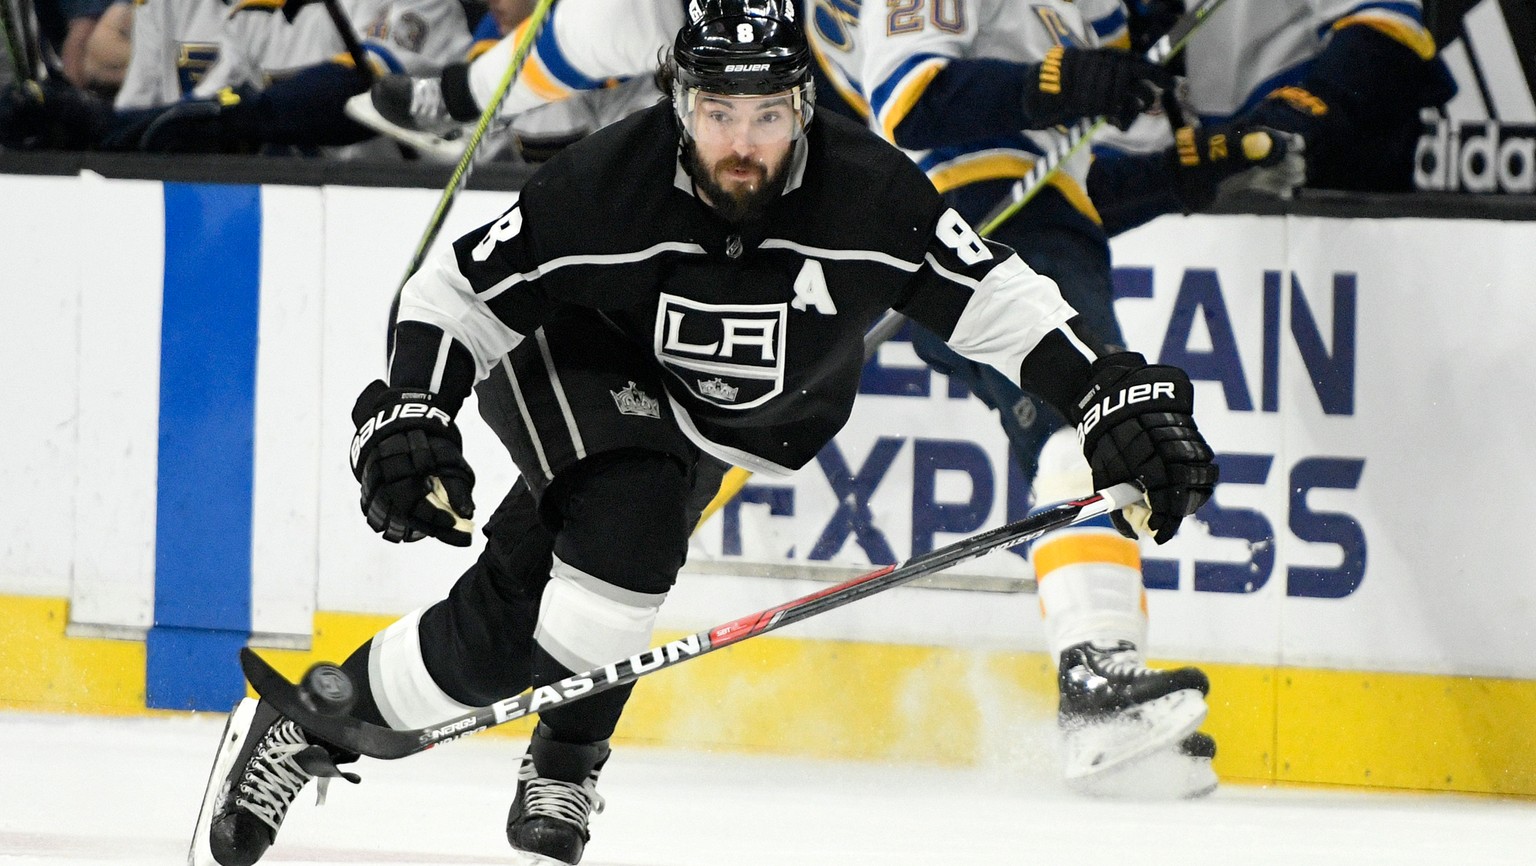 FILE - In this March 10, 2018, file photo, Los Angeles Kings defenseman Drew Doughty (8) brings the puck up the ice against St. Louis Blues during an NHL hockey game in Los Angeles. Through the first  ...